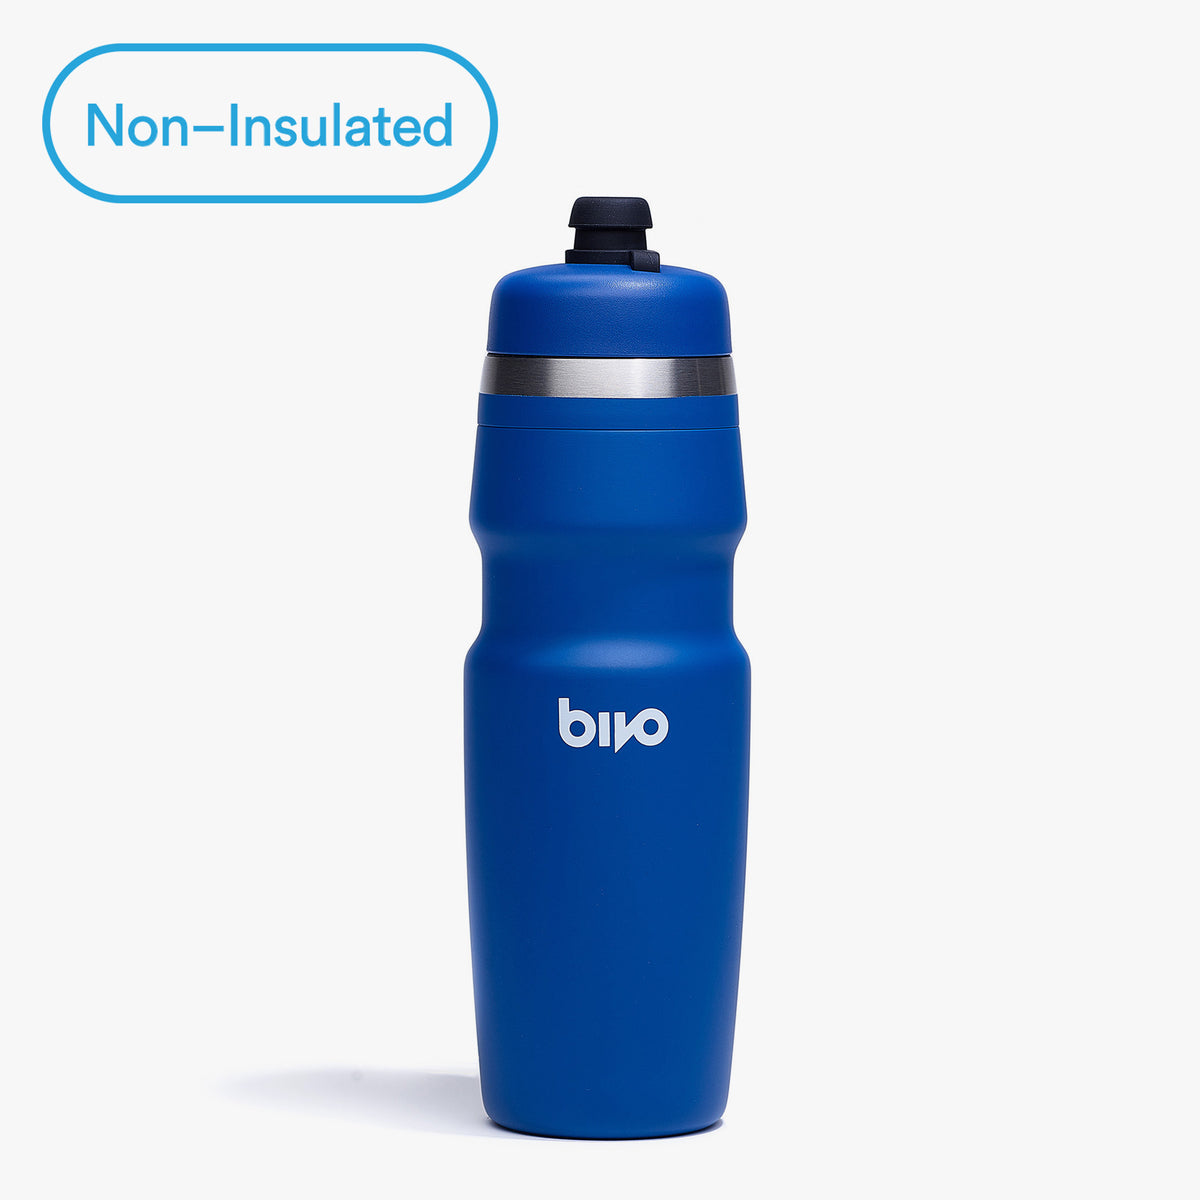 Never Go Thirsty Again With These Cute, Functional Water Bottles